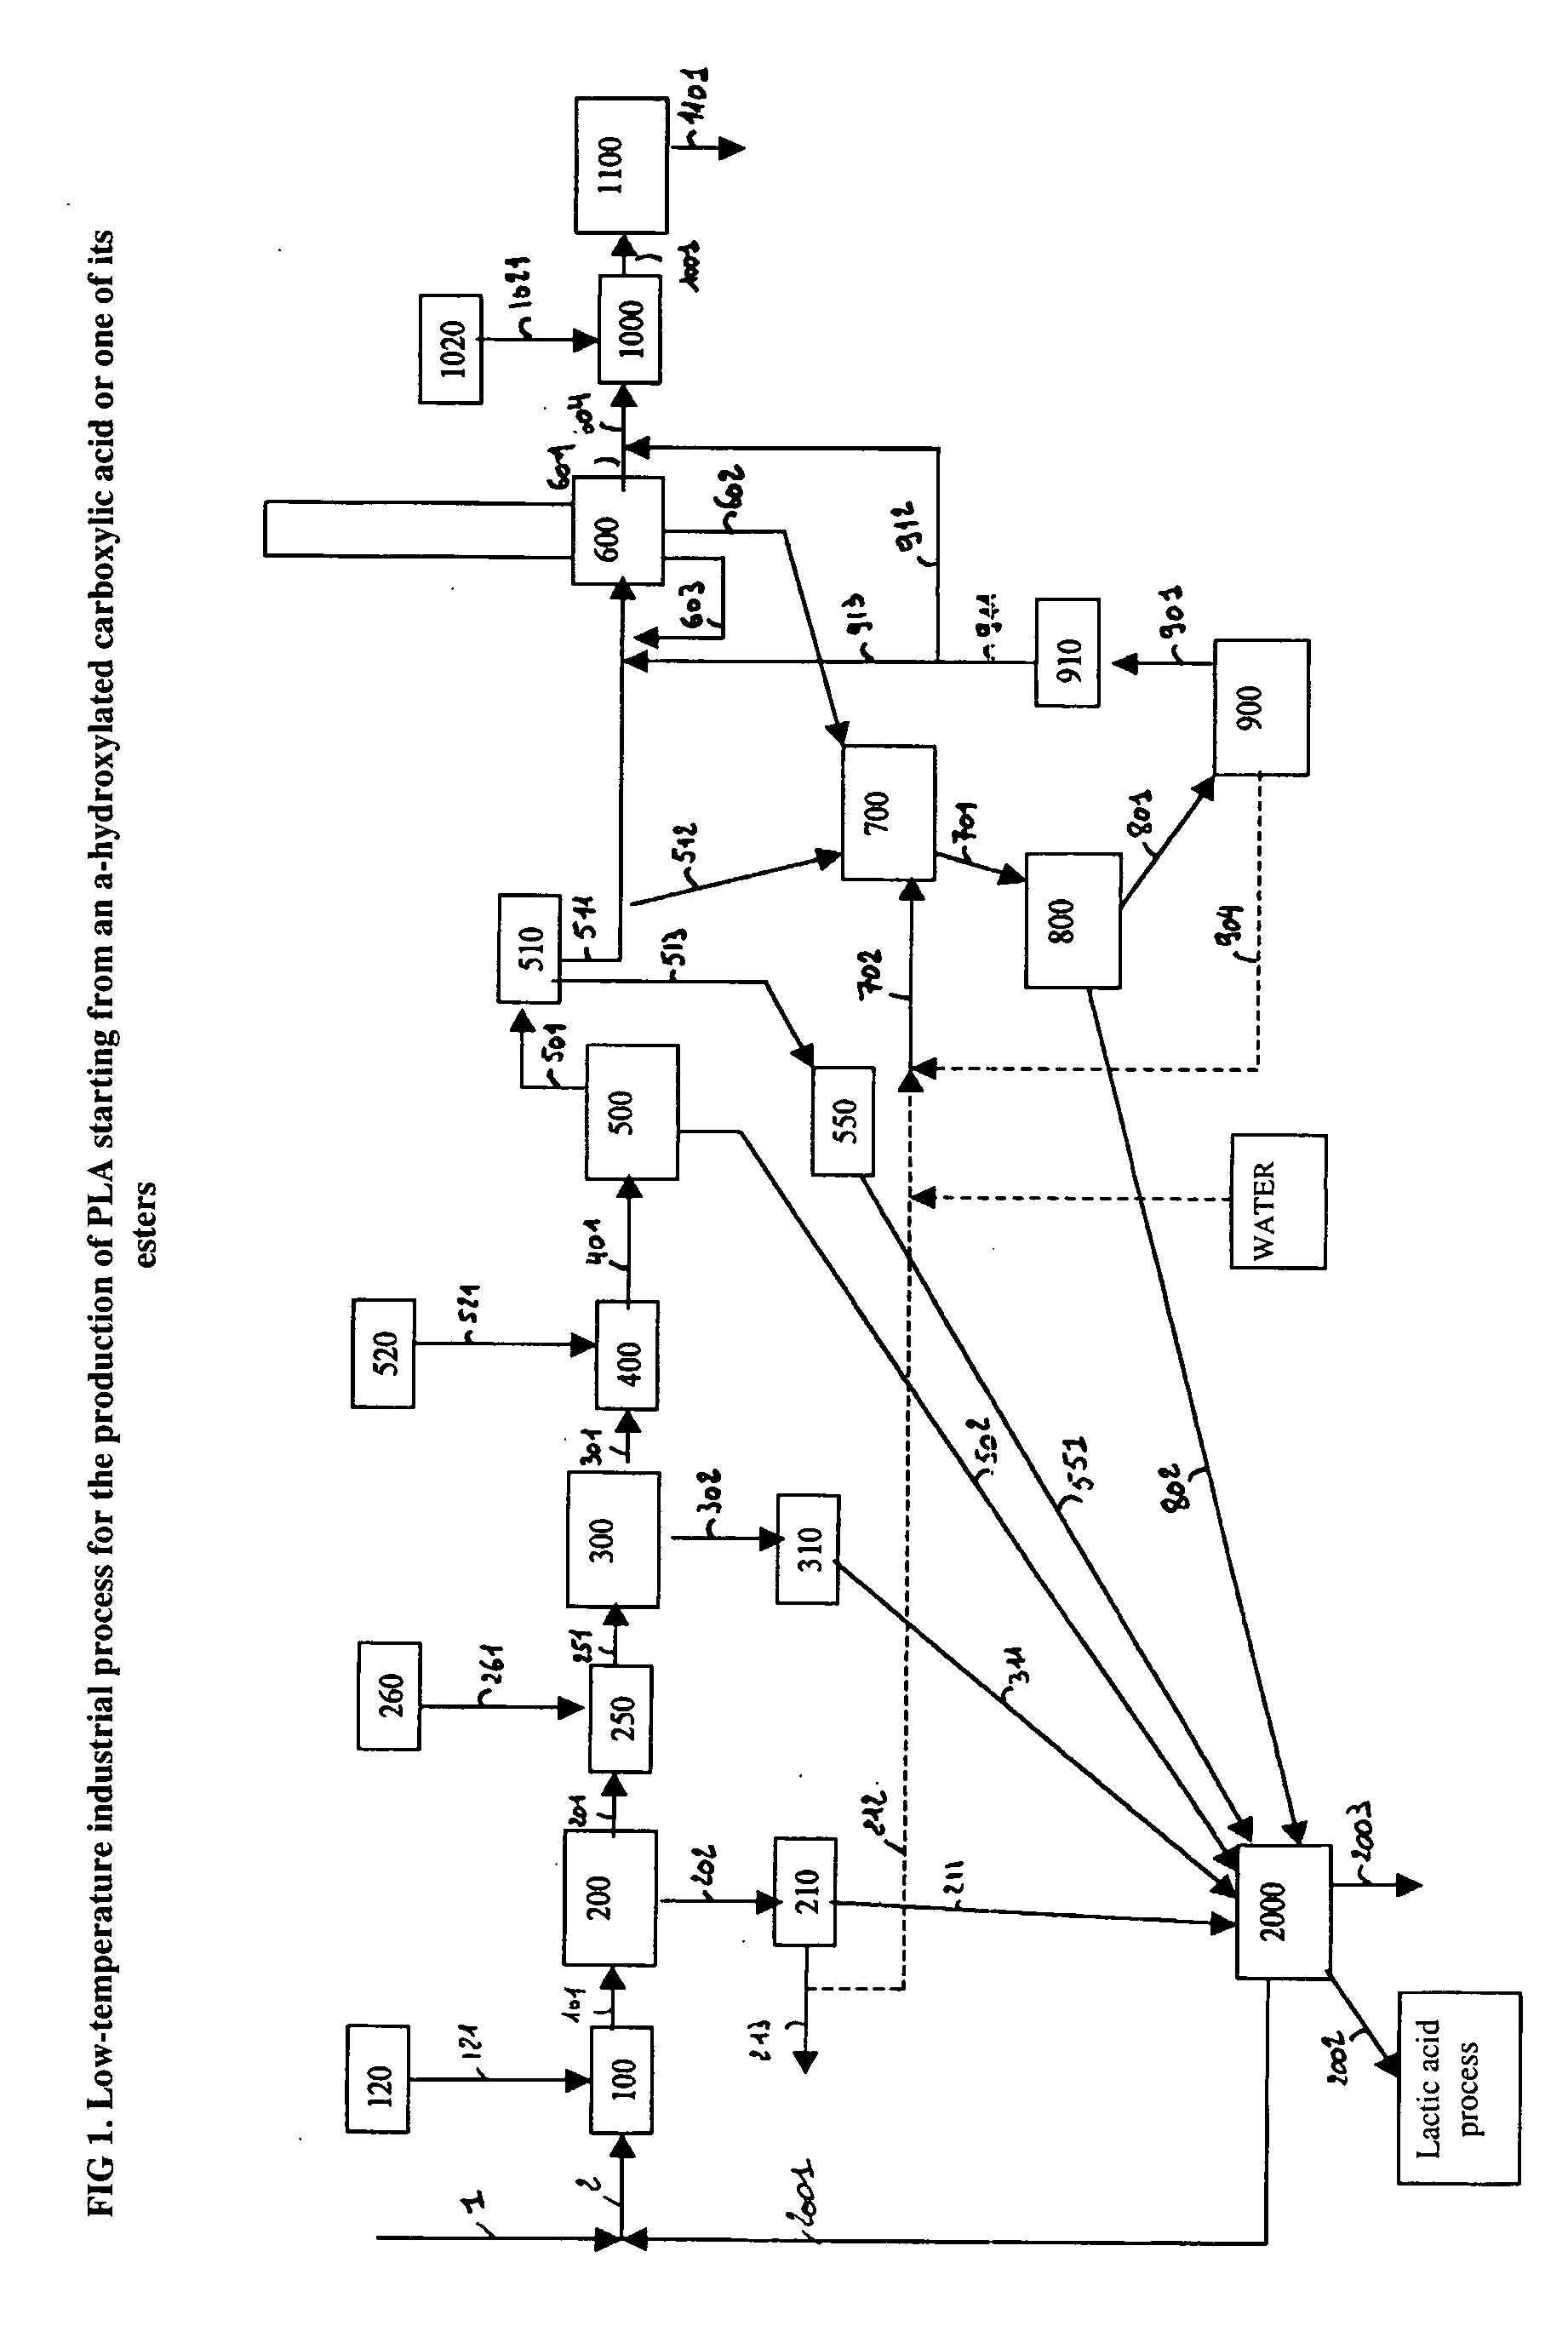 Method for the productiion of polylactide from a solution of lactic acid or one of the derivatives thereof